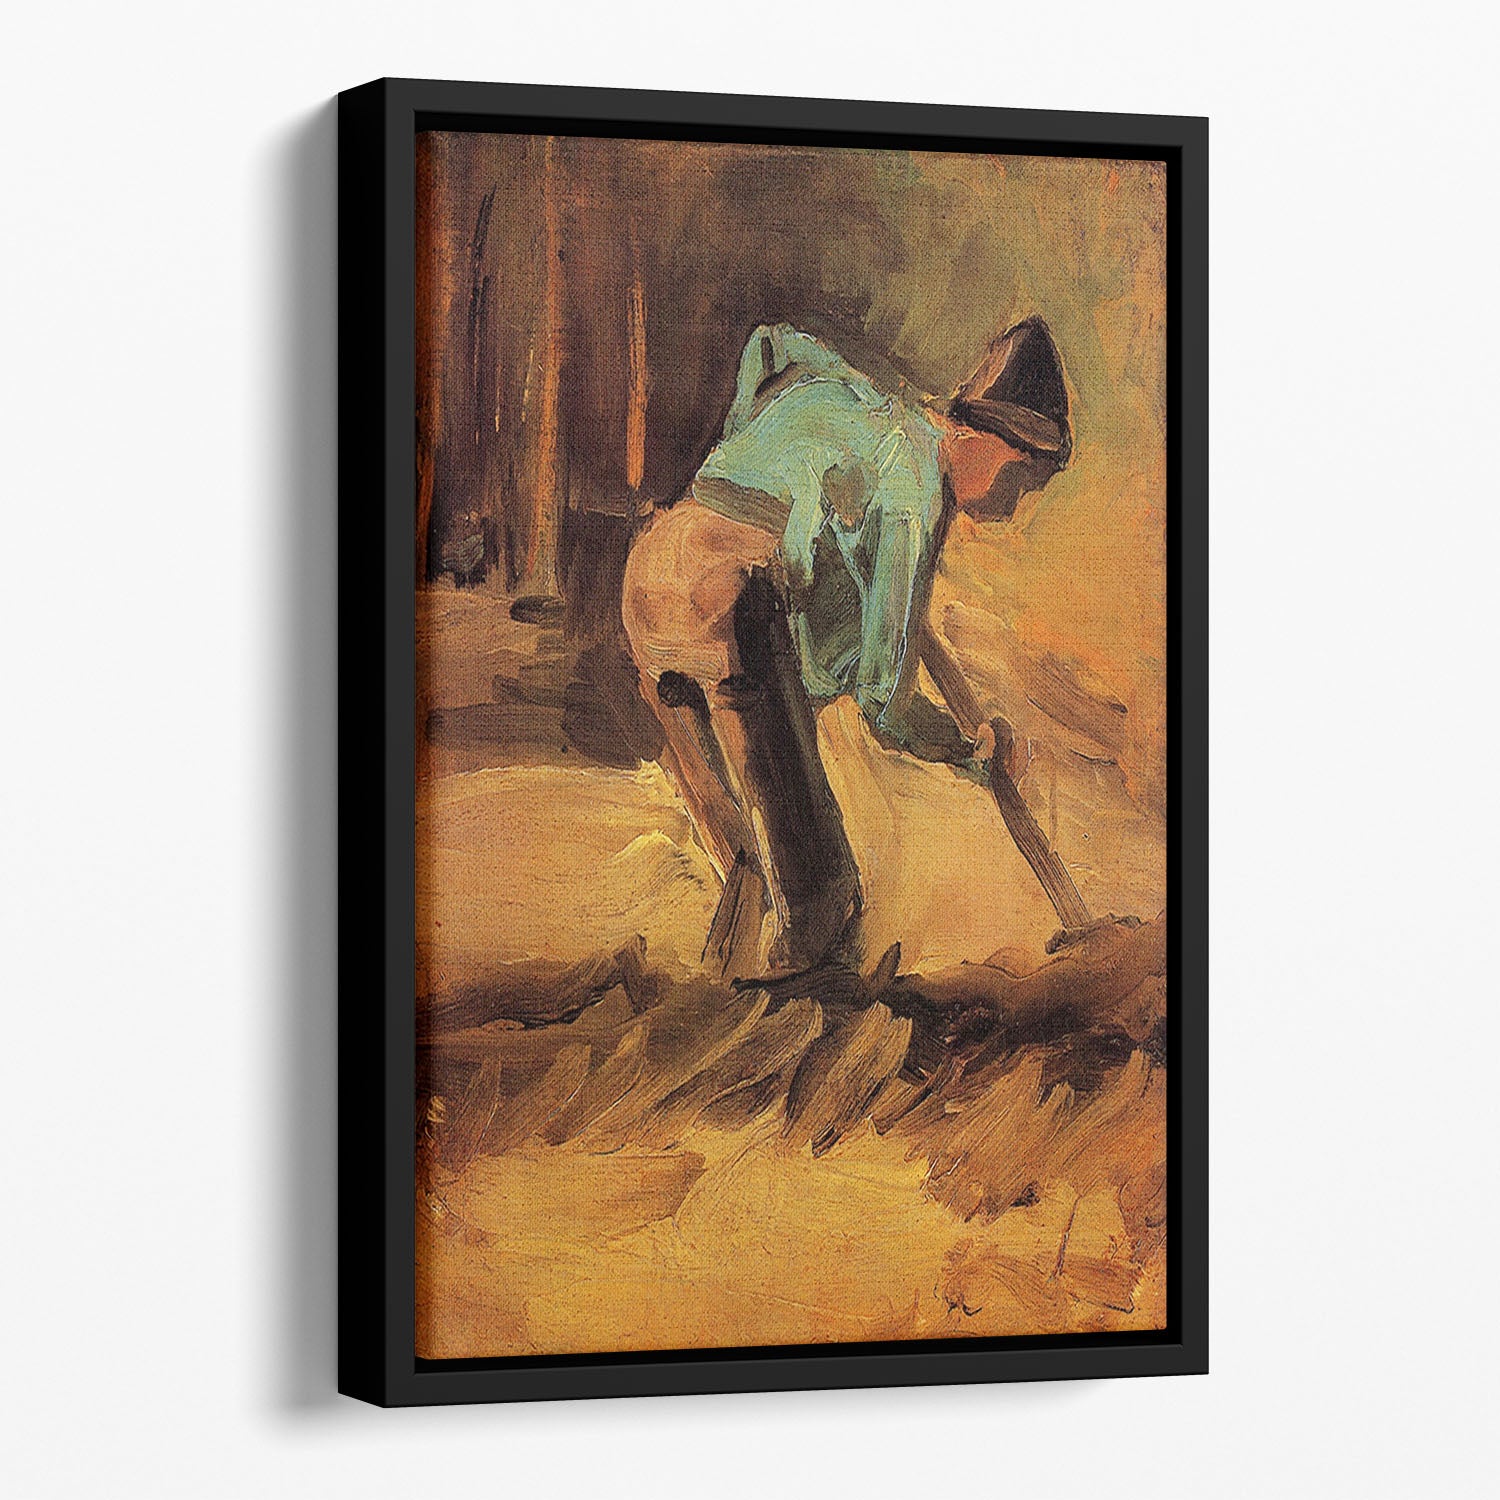 Man Stooping with Stick or Spade by Van Gogh Floating Framed Canvas